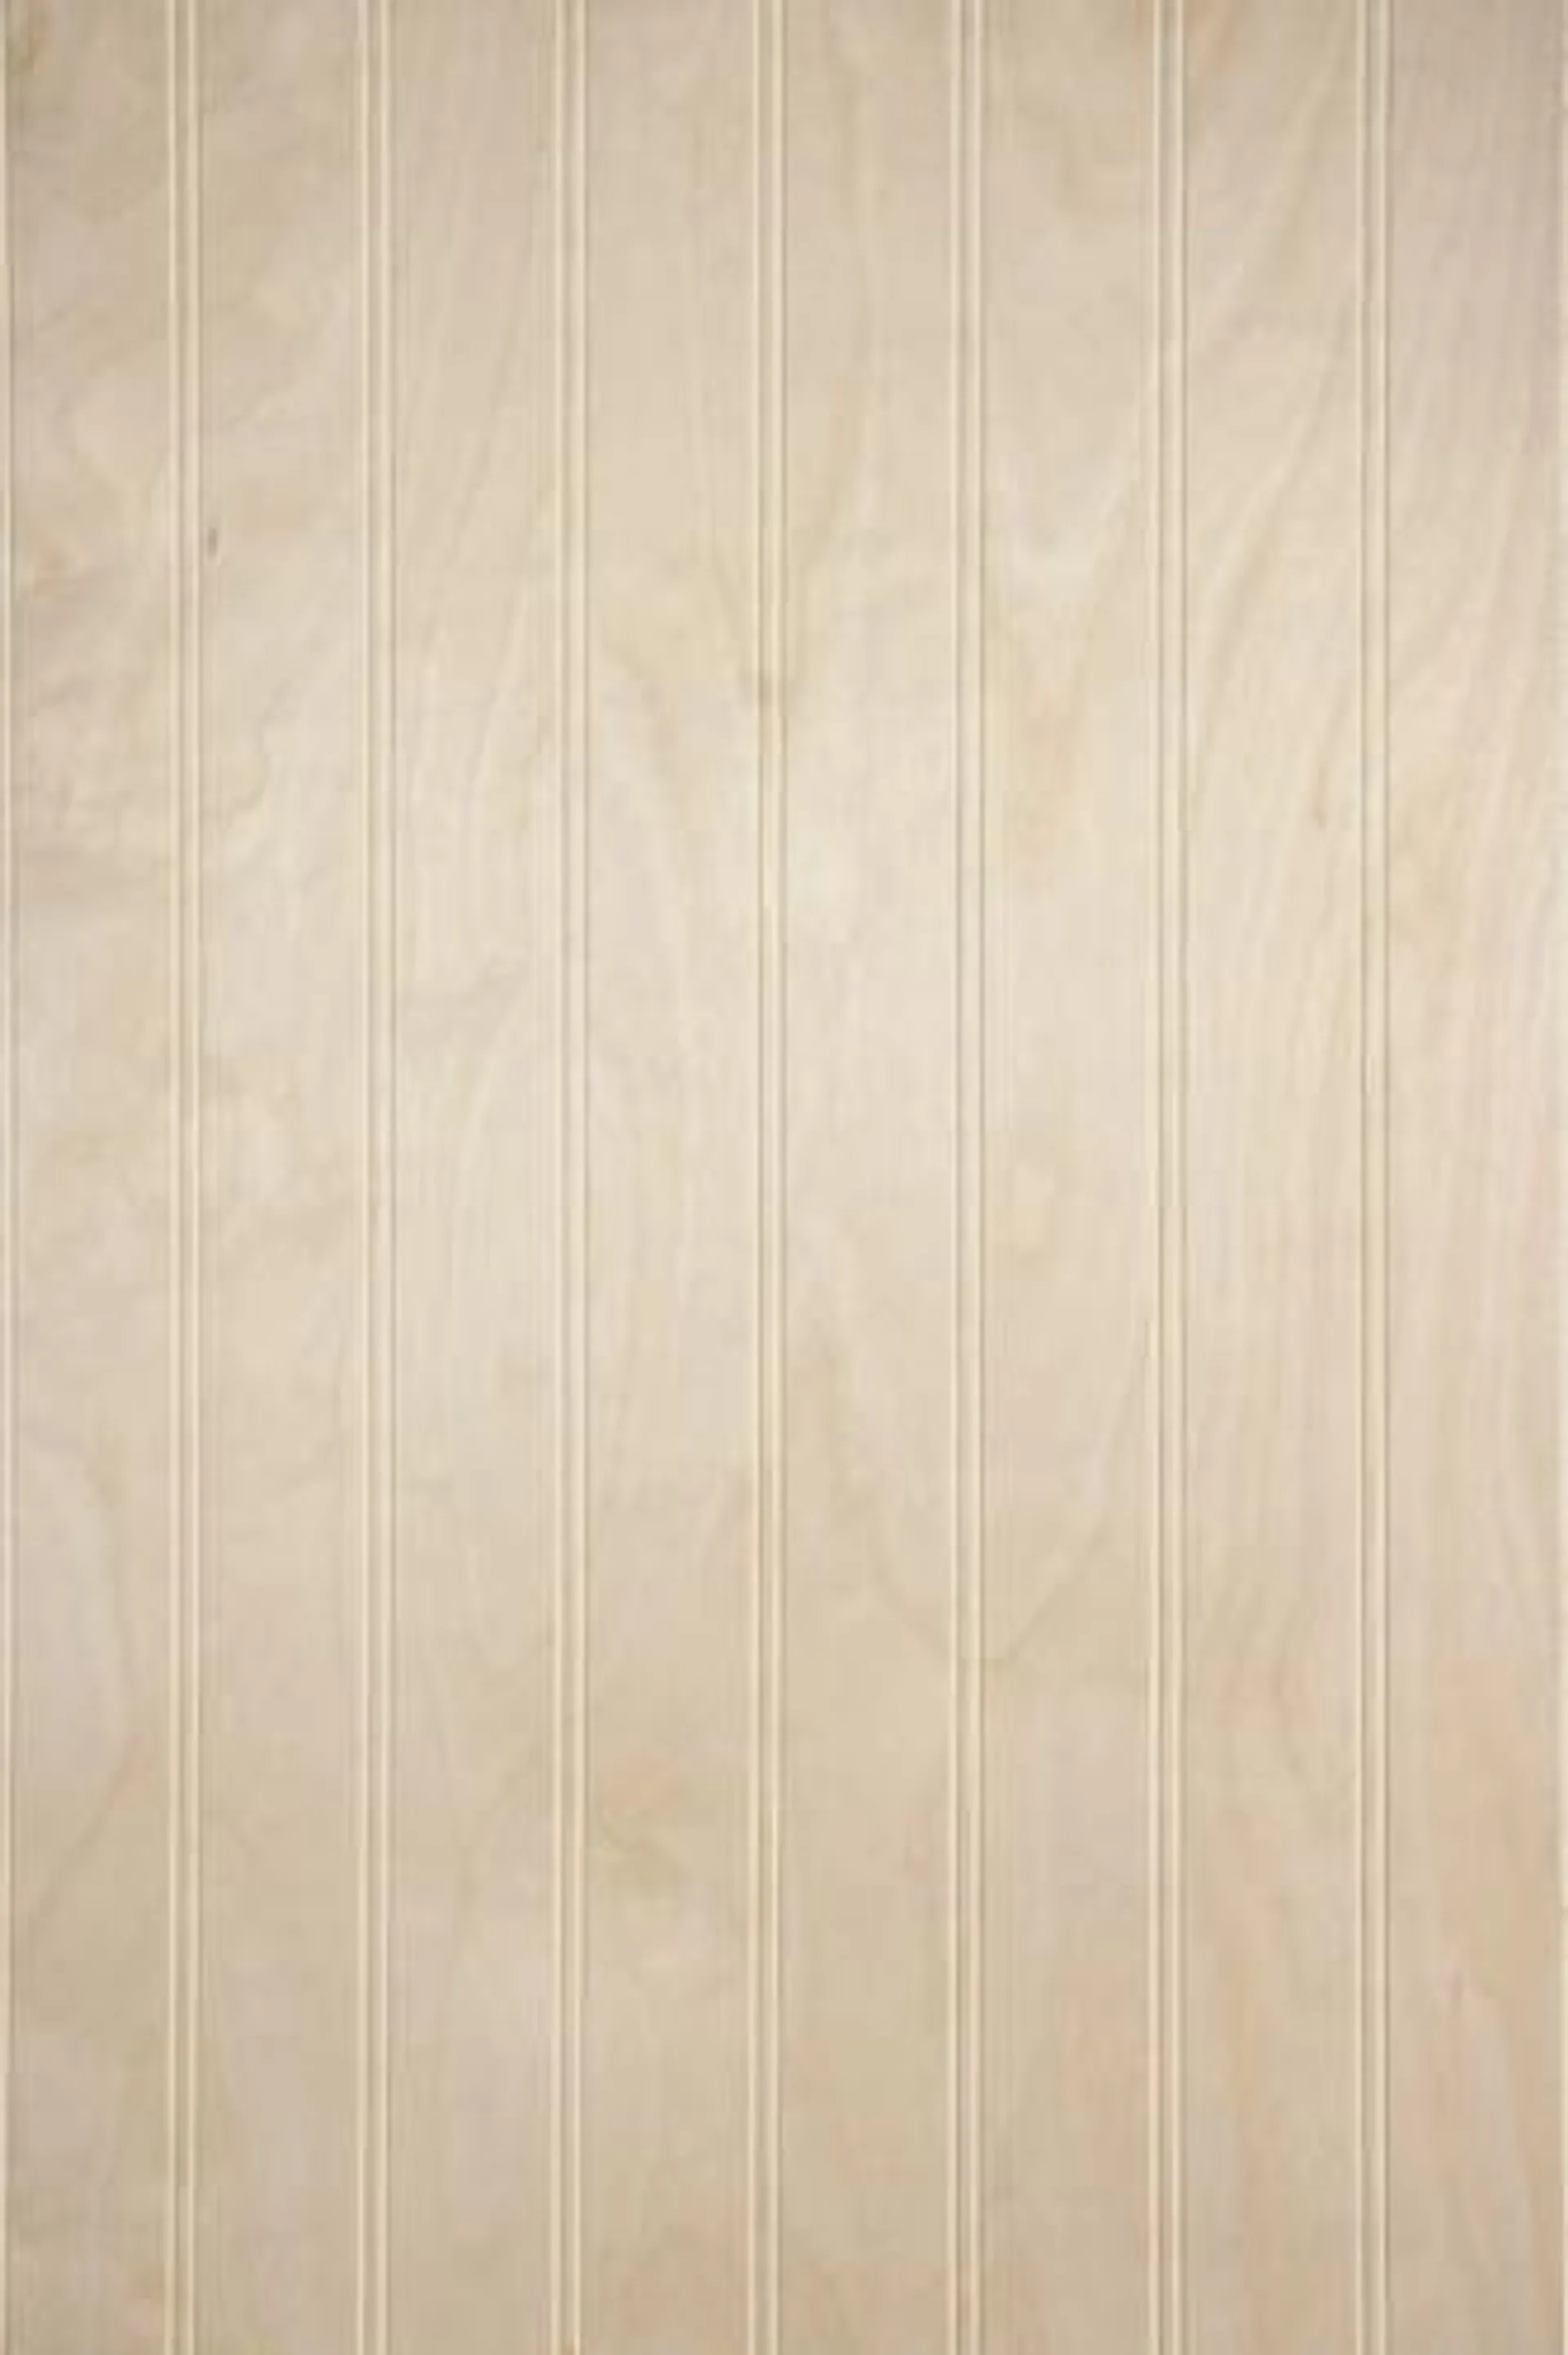 Imported beaded white birch plywood, 5.2 mm x 4 ft x 8 ft - Birch